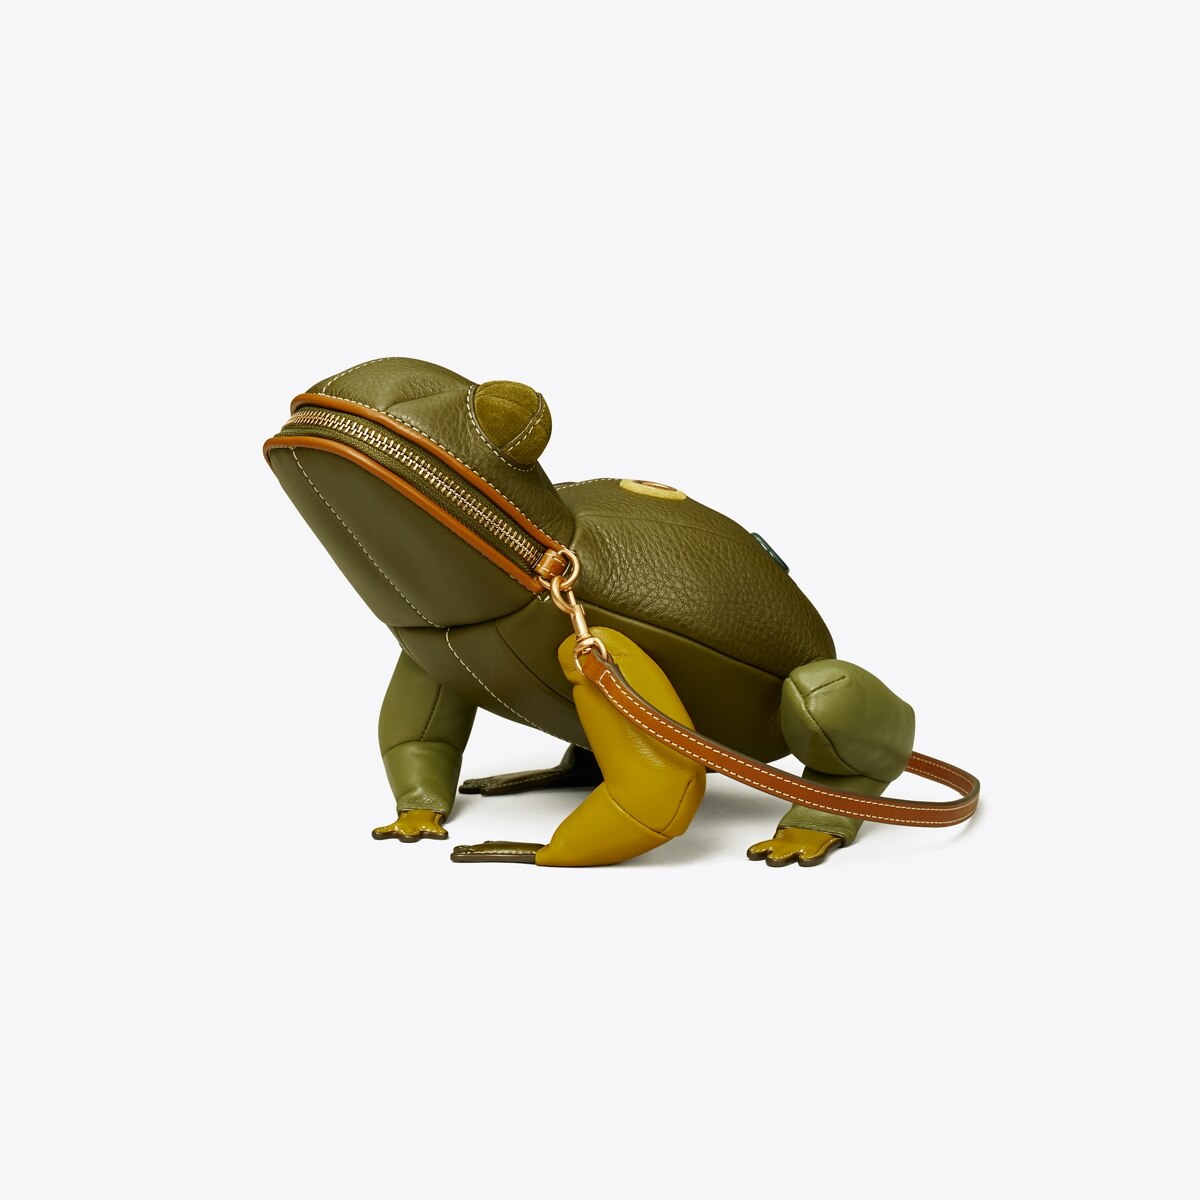 Tory the Toad Backpack: Women's Designer Backpacks | Tory Burch